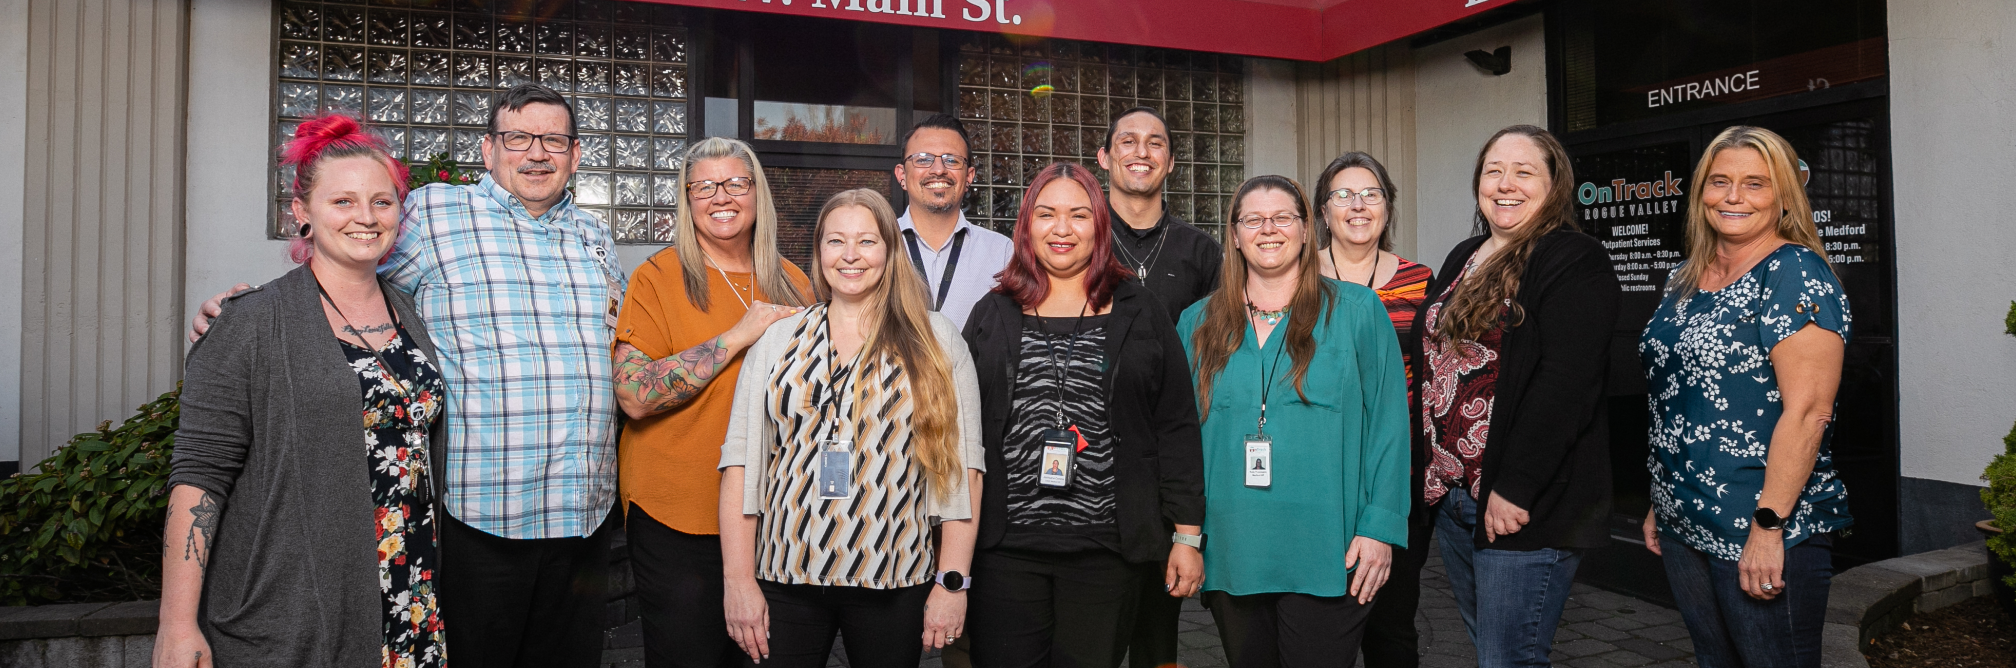 Eleven adults in casual business attire stand smiling at the entrance to OnTrack Rogue Valley, a treatment center that received additional staff funding from CareOregon.